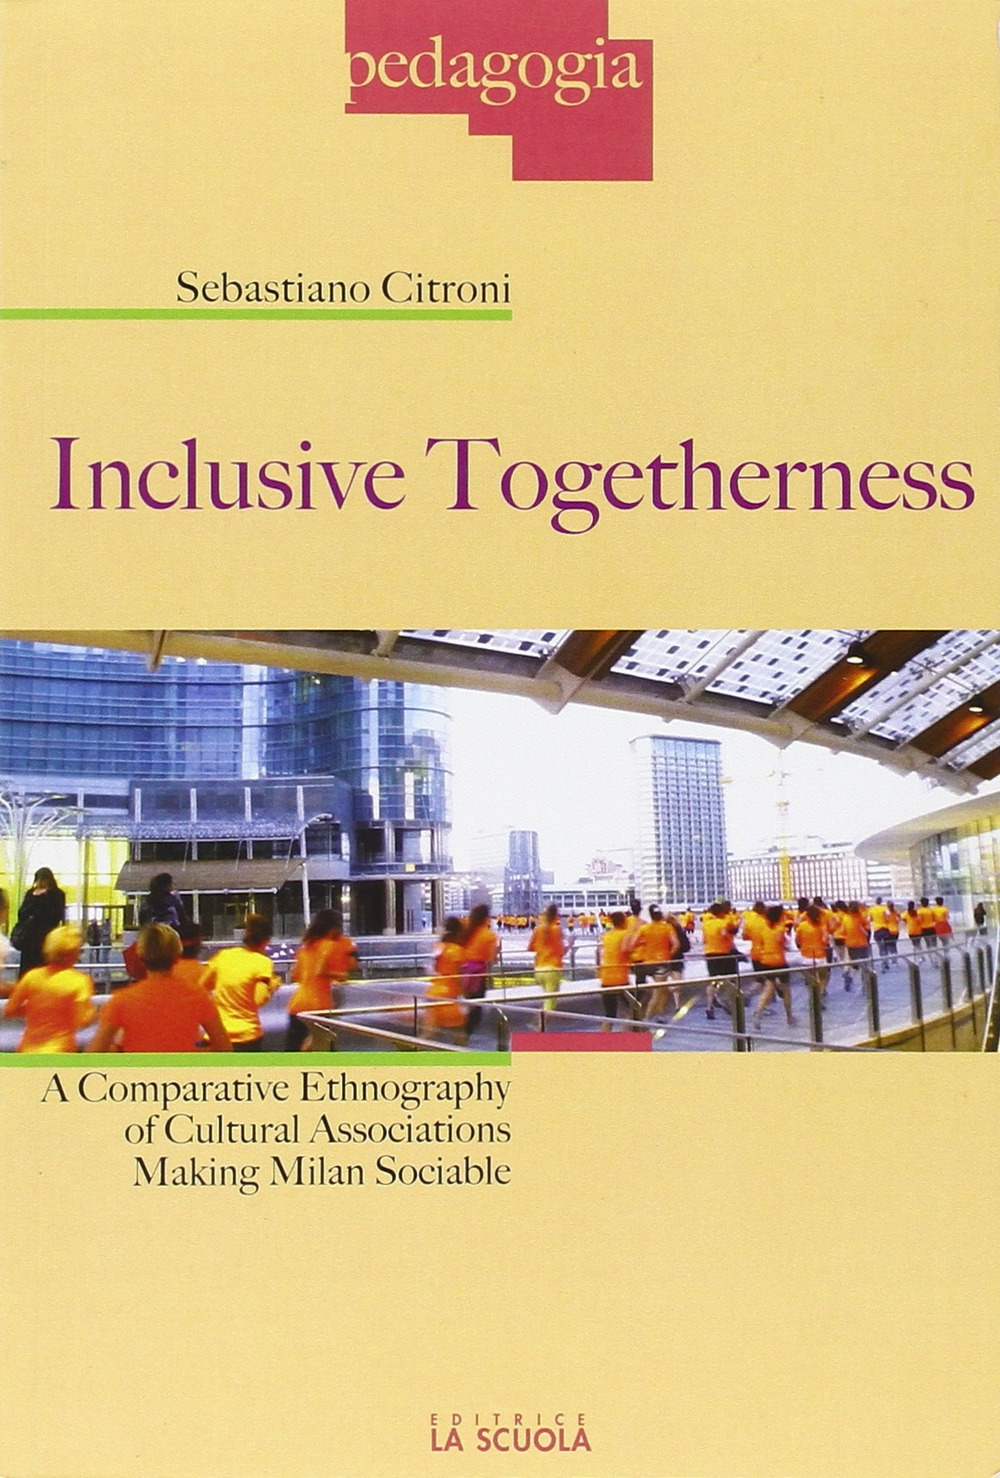 Inclusive togetherness. A comparative ethnography of cultural associations making Milan sociable